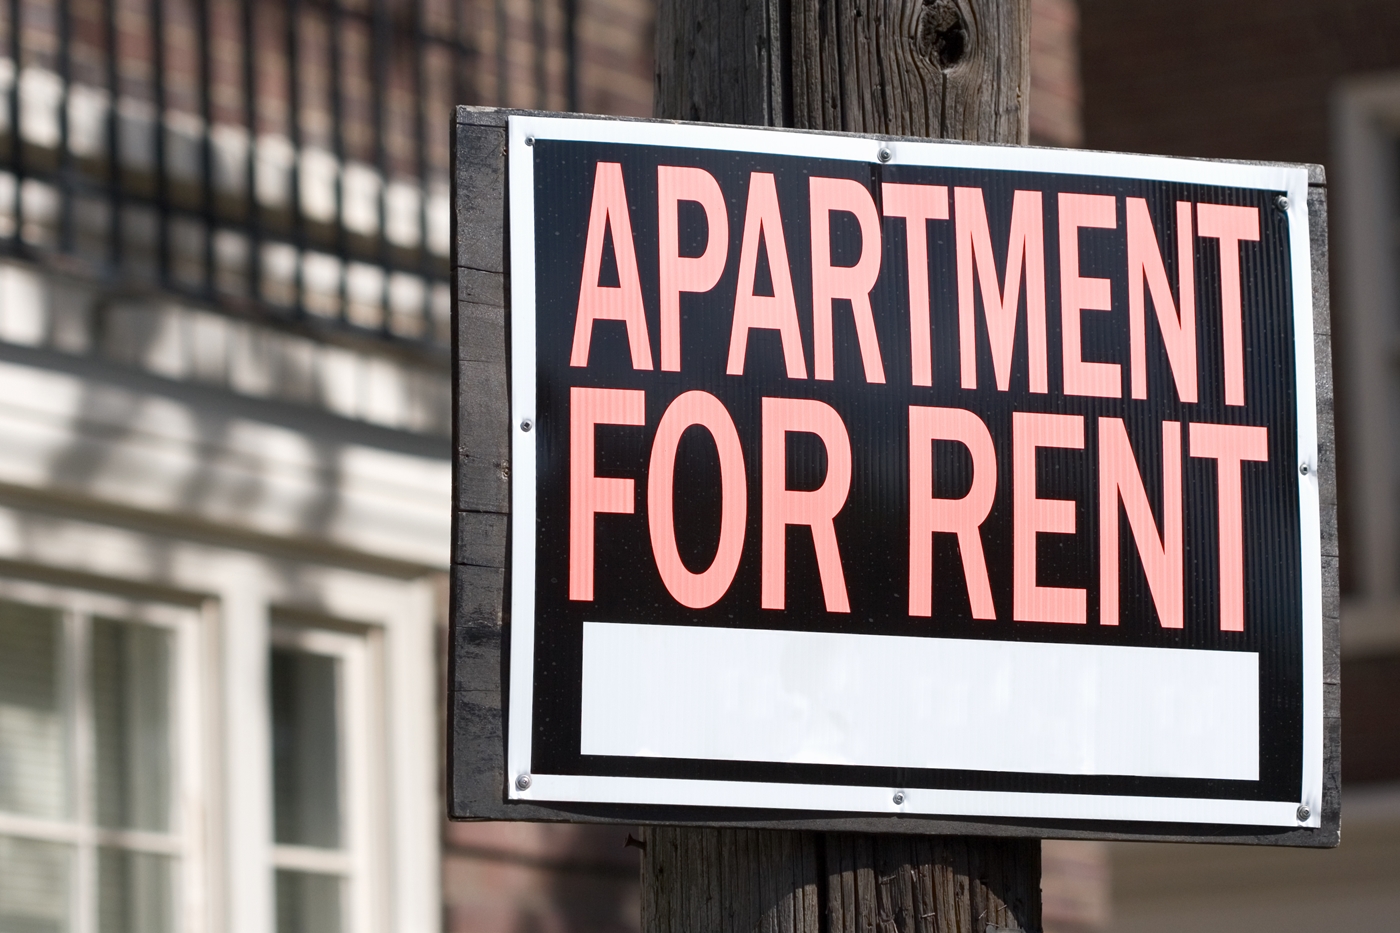 Rent prices rose 9% in April, and could keep rising with a housing slowdown